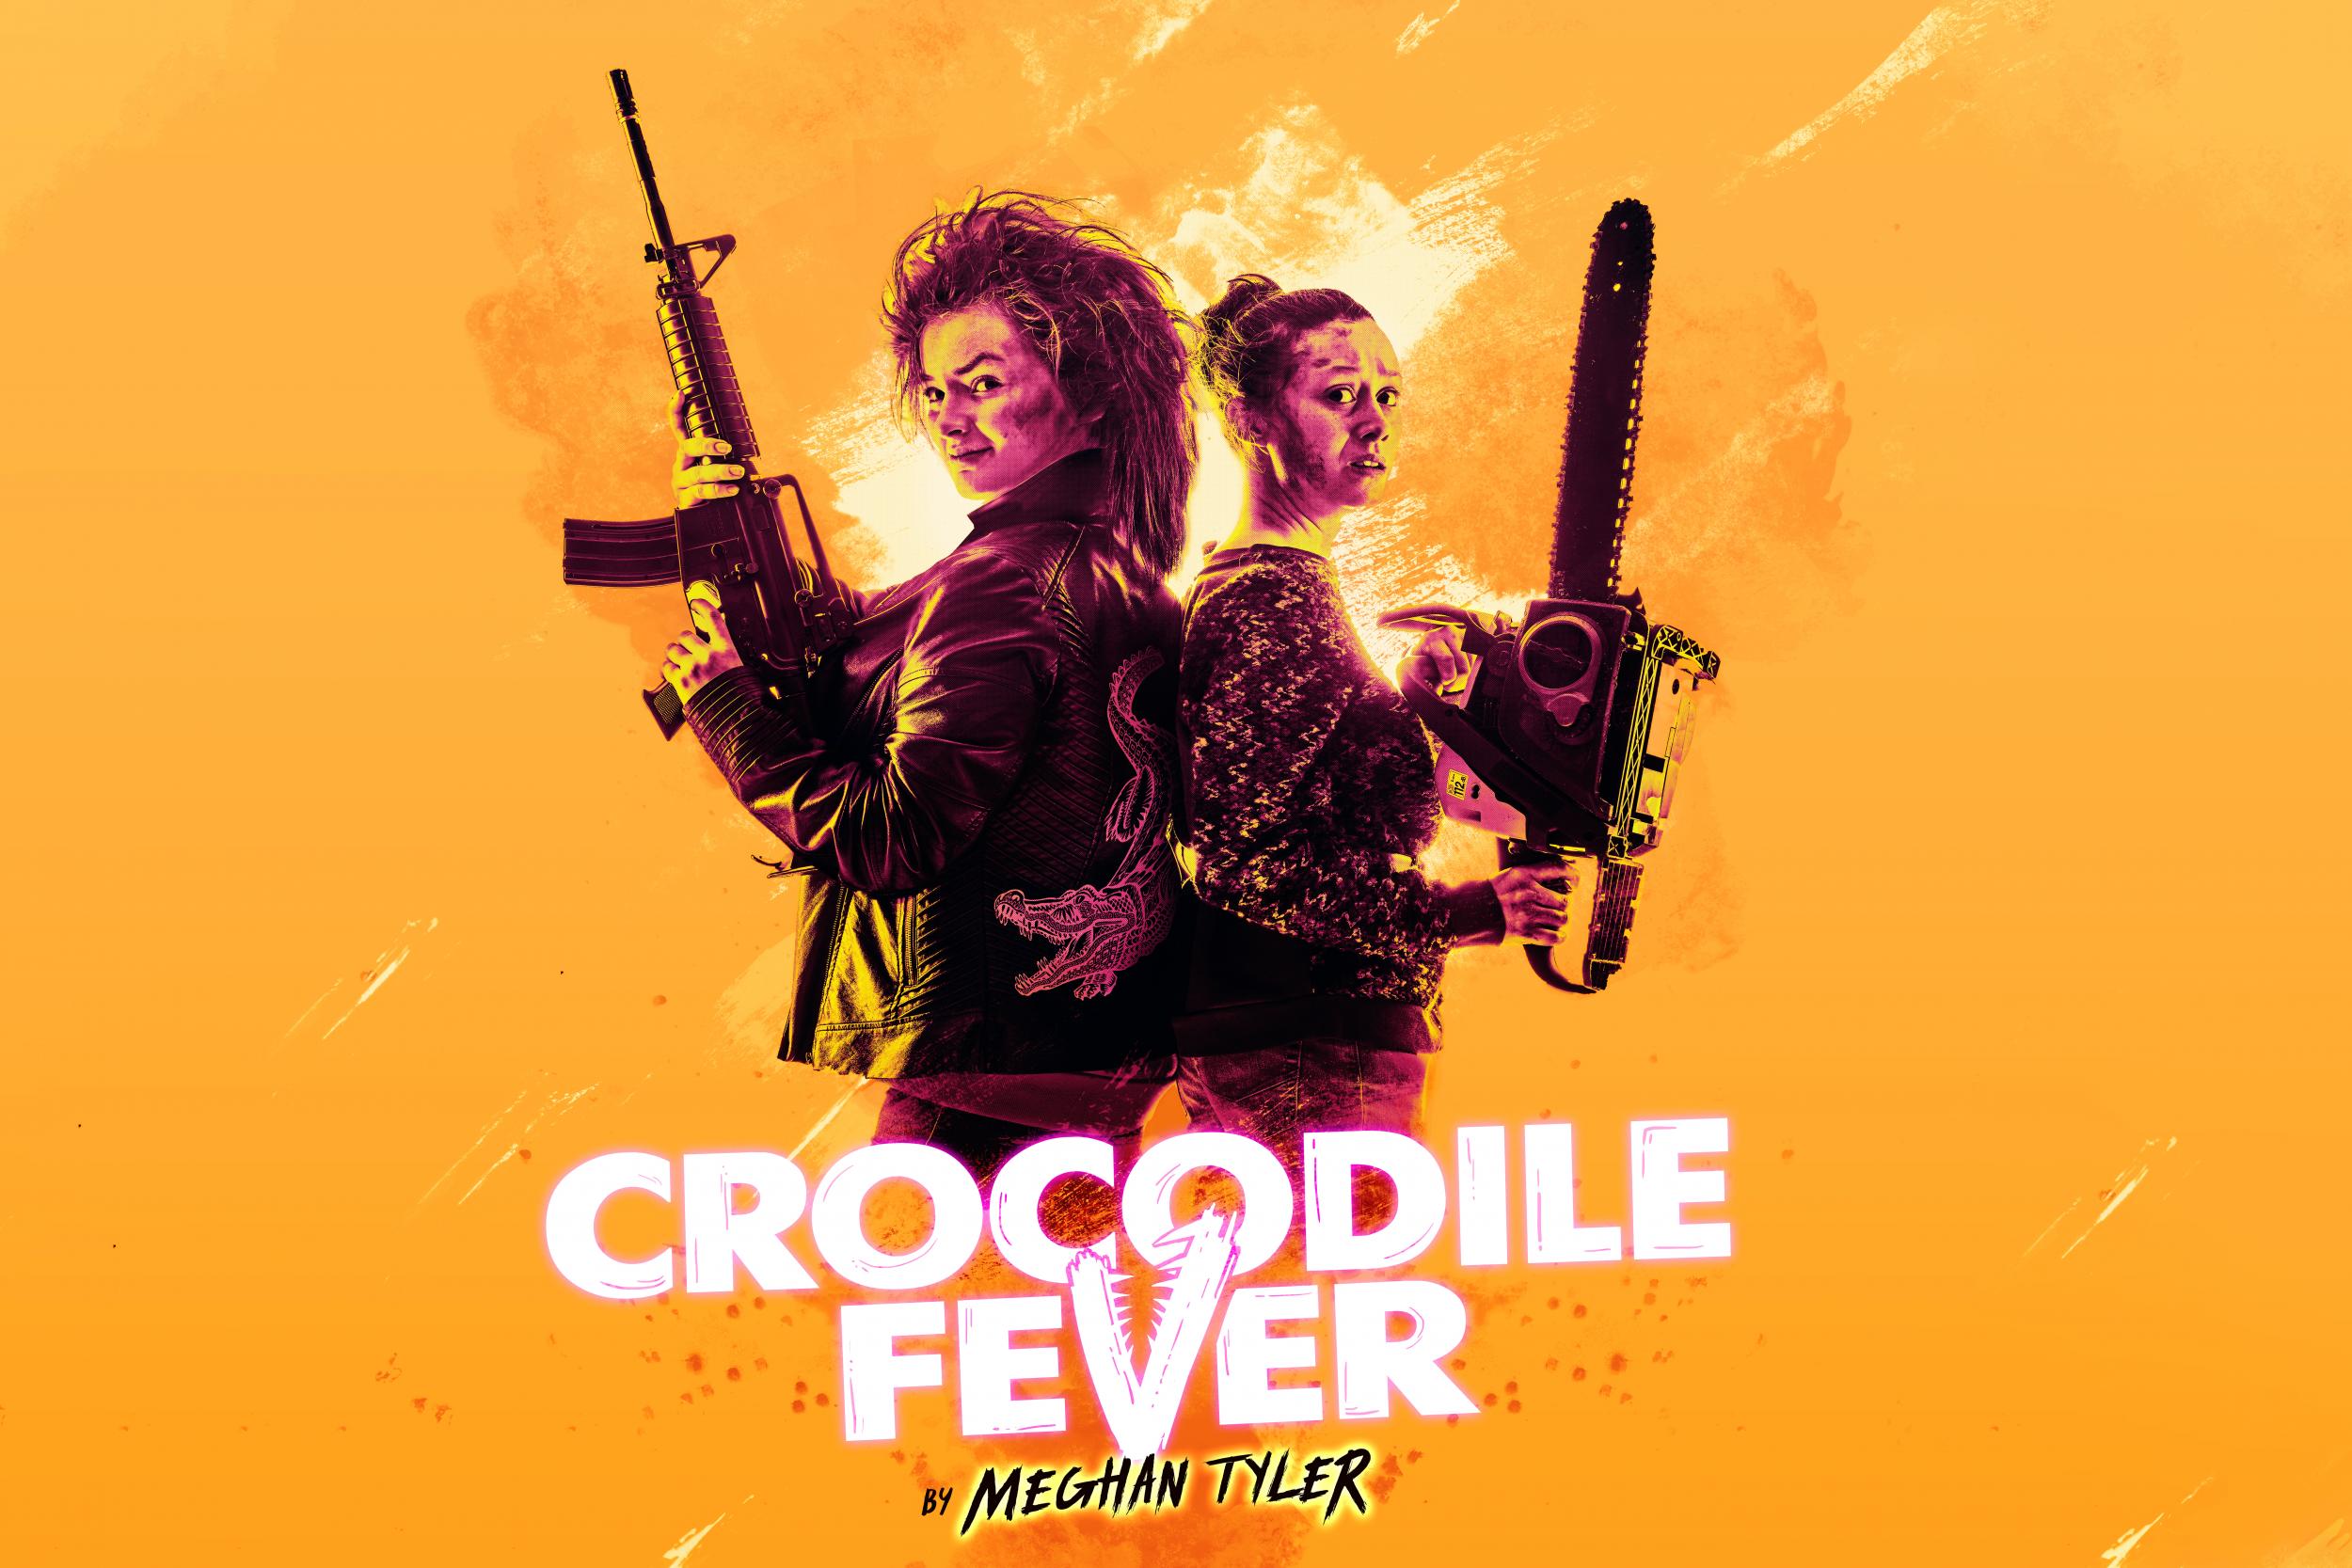 Meghan Tyler’s ‘Crocodile Fever’ is a black comedy about chainsaw-toting Irish sisters during the Troubles